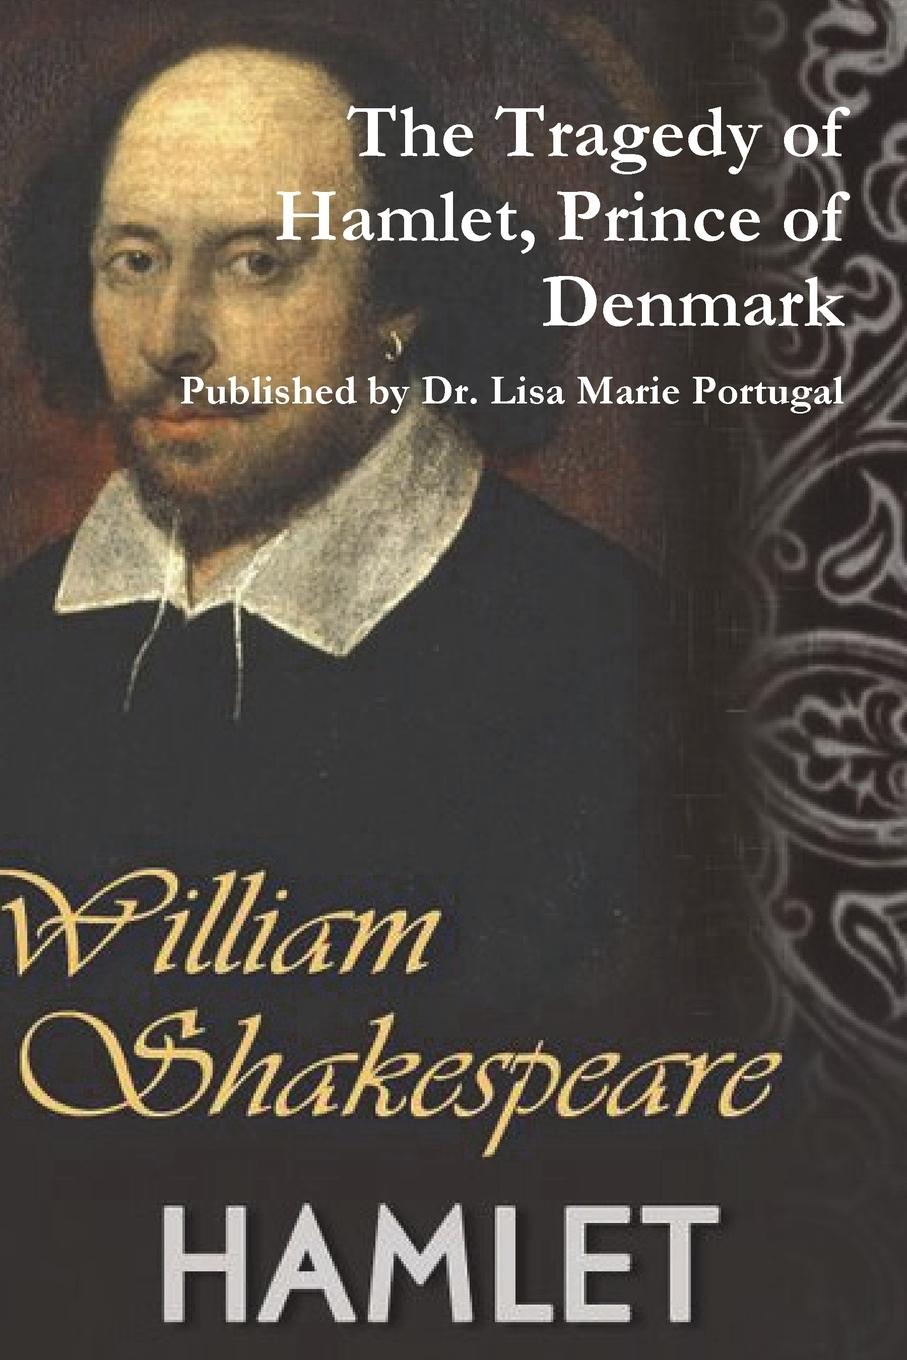 The Tragedy of Hamlet, Prince of Denmark by William Shakespeare - Portugal, Lisa Marie